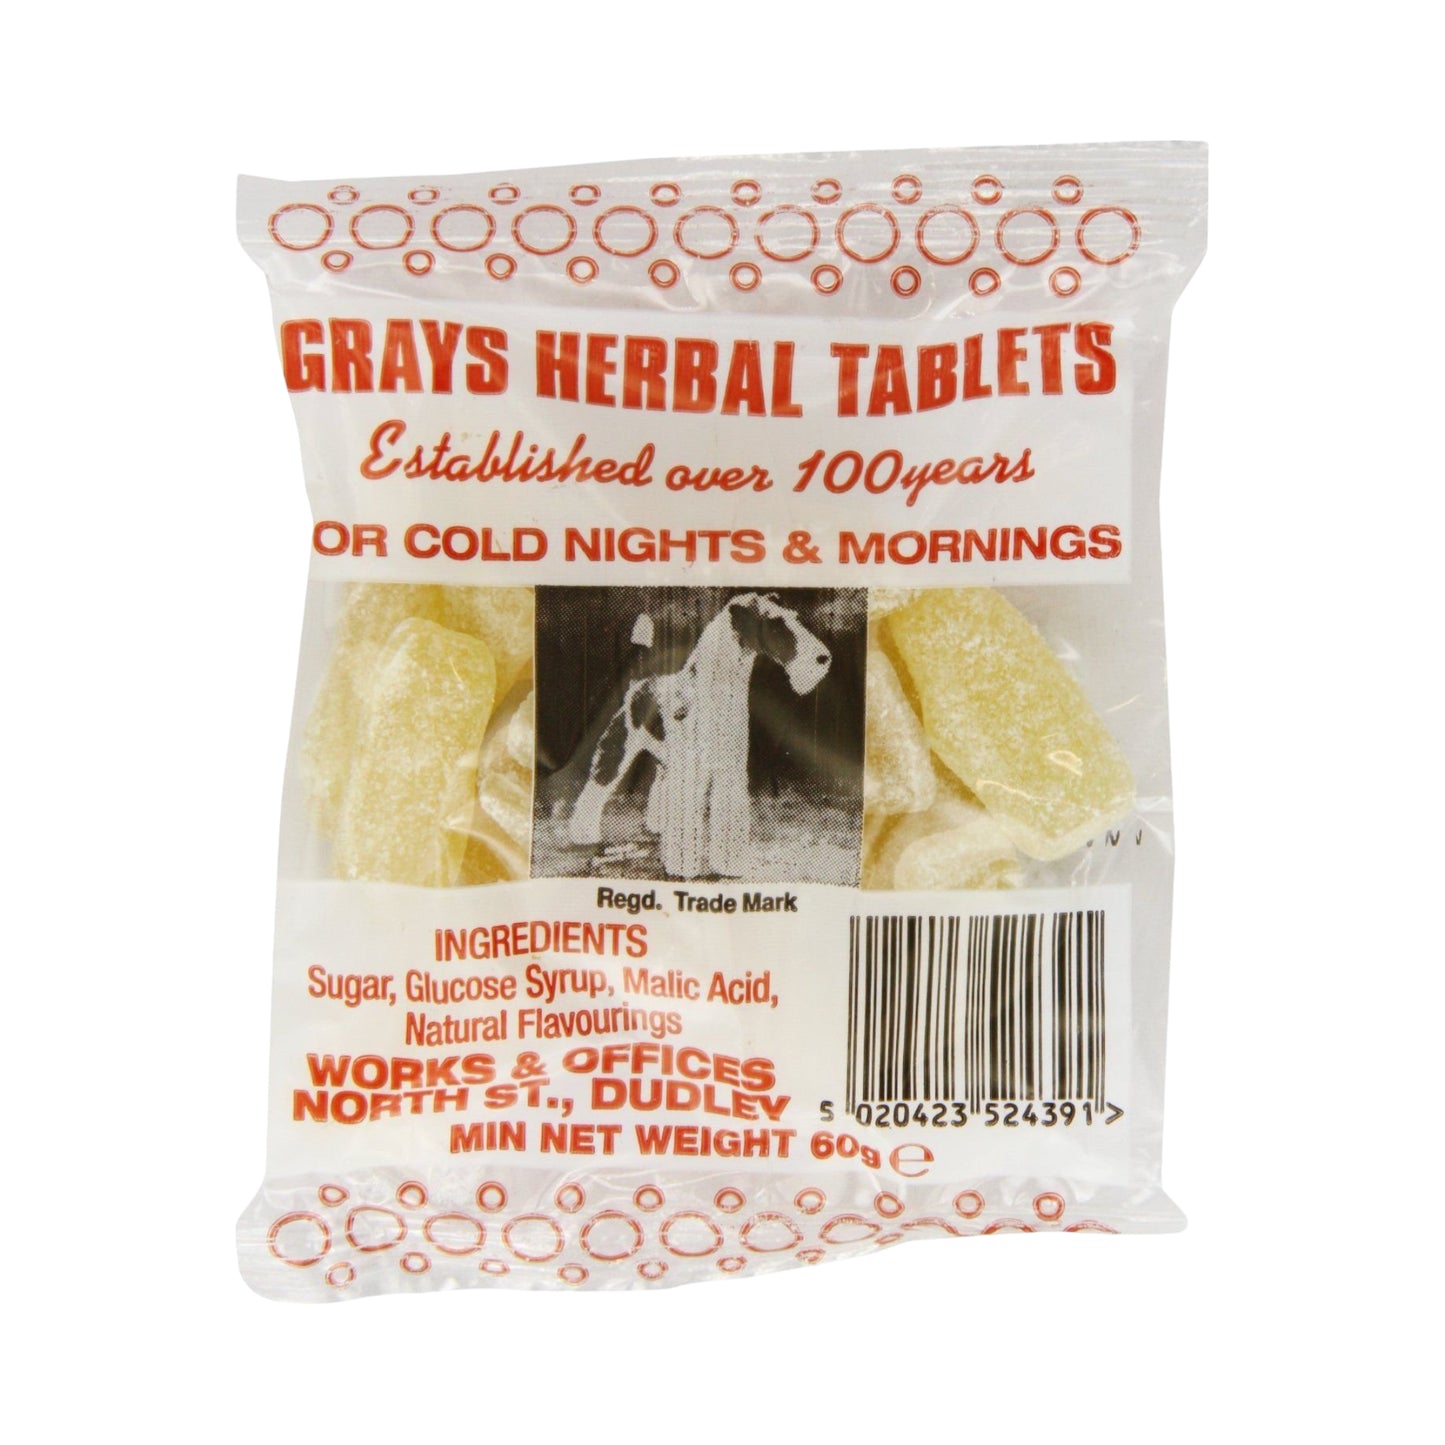 Gray's Herbal Tablets Packets - 60g